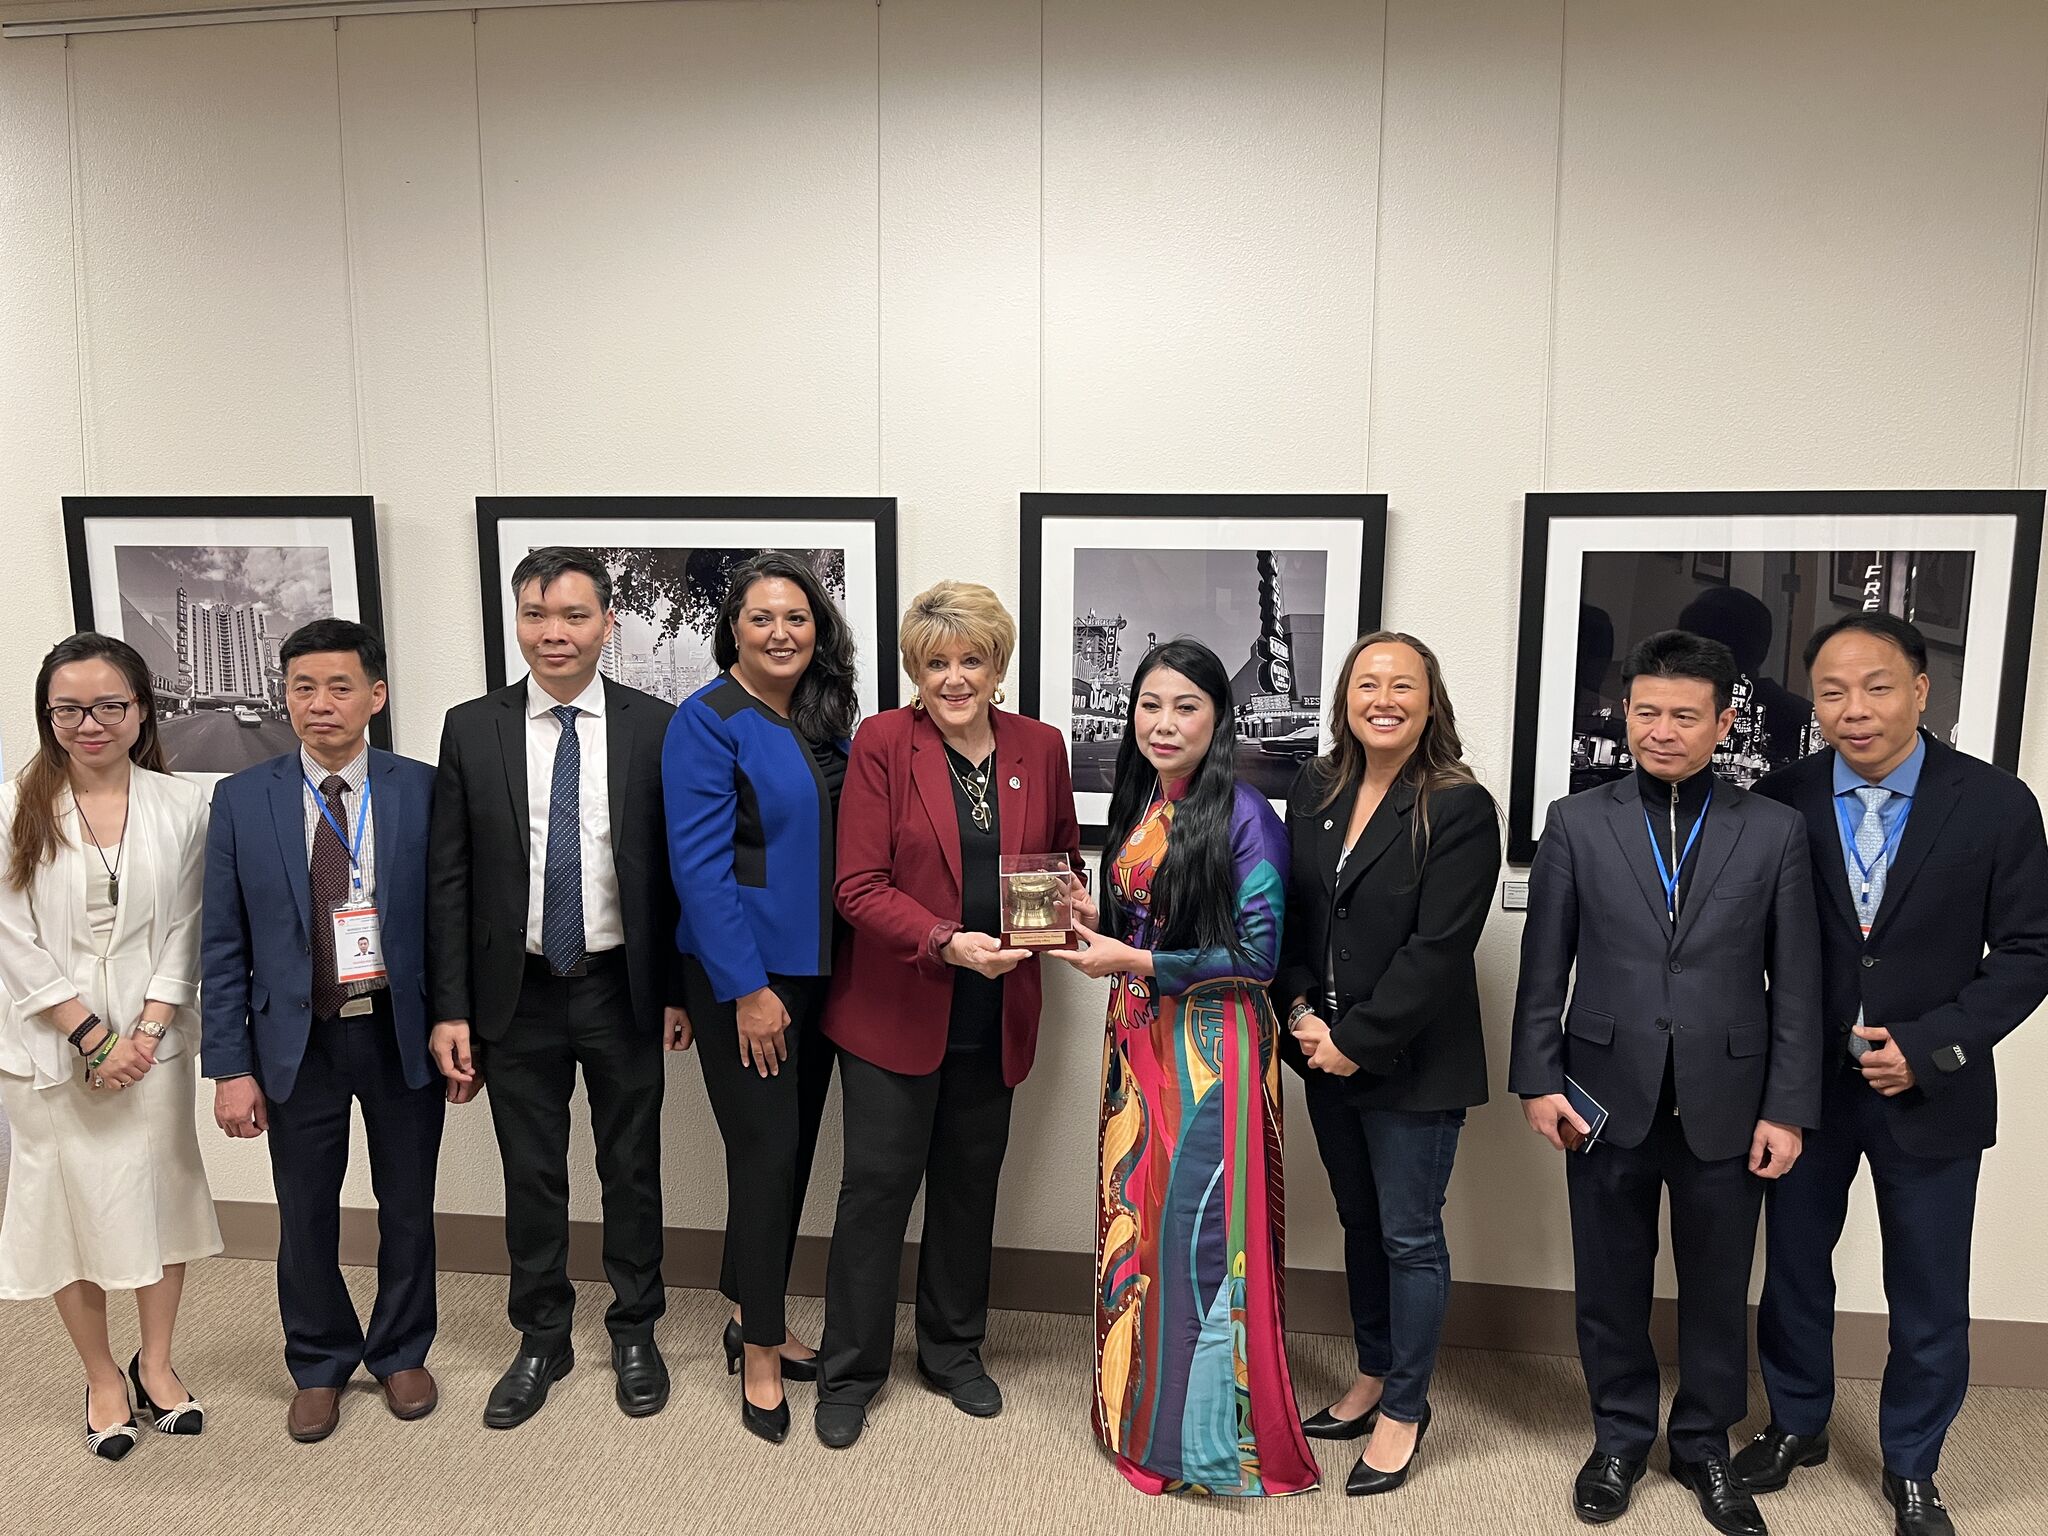 Las Vegas Mayor Carolyn Goodman Meets with Vietnam Province of Vinh Phuc and VCCI Leaders